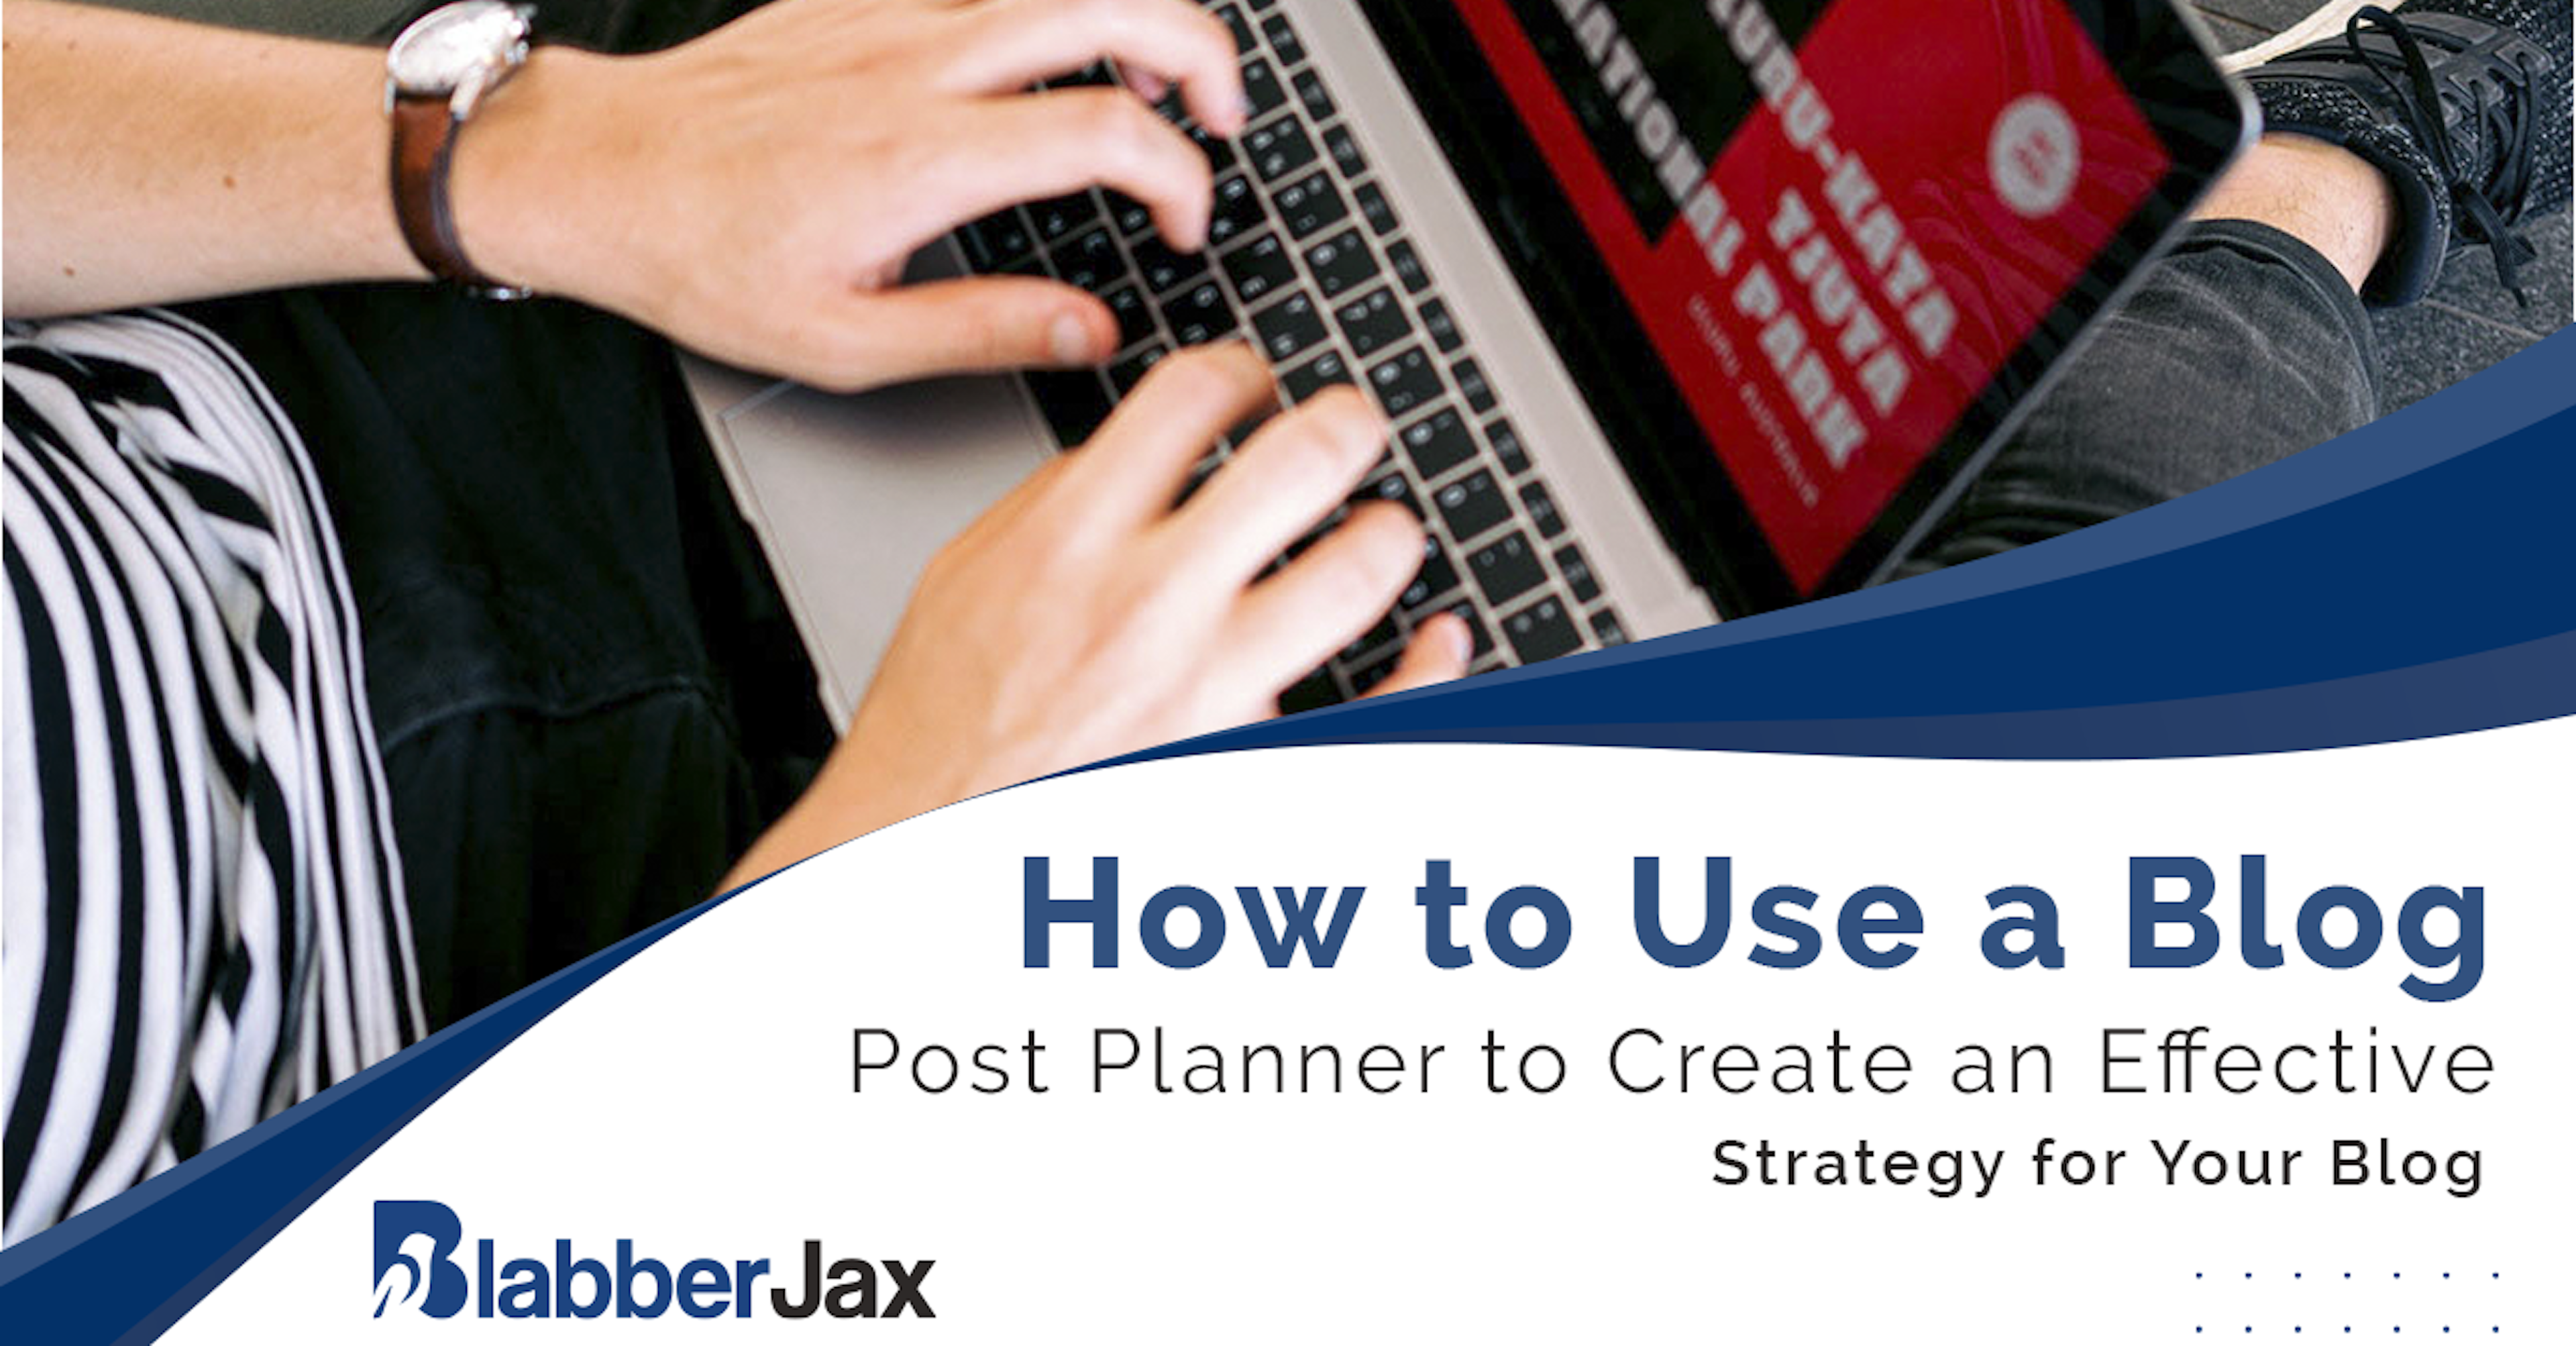 How to Use a Blog Post Planner to Create an Effective Strategy for Your Blog